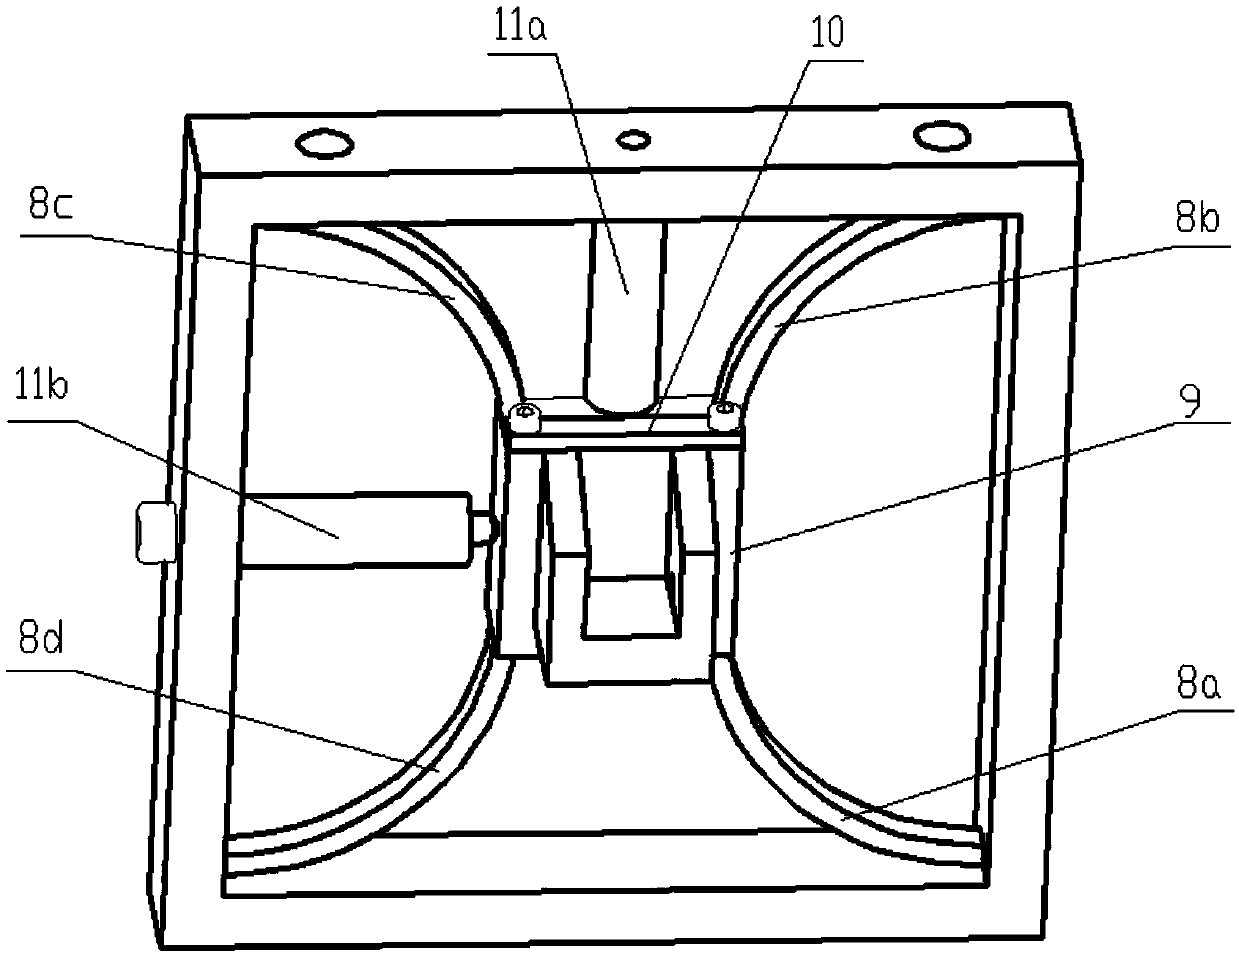 Three-dimensional elliptical vibration cutting device for space curved beam